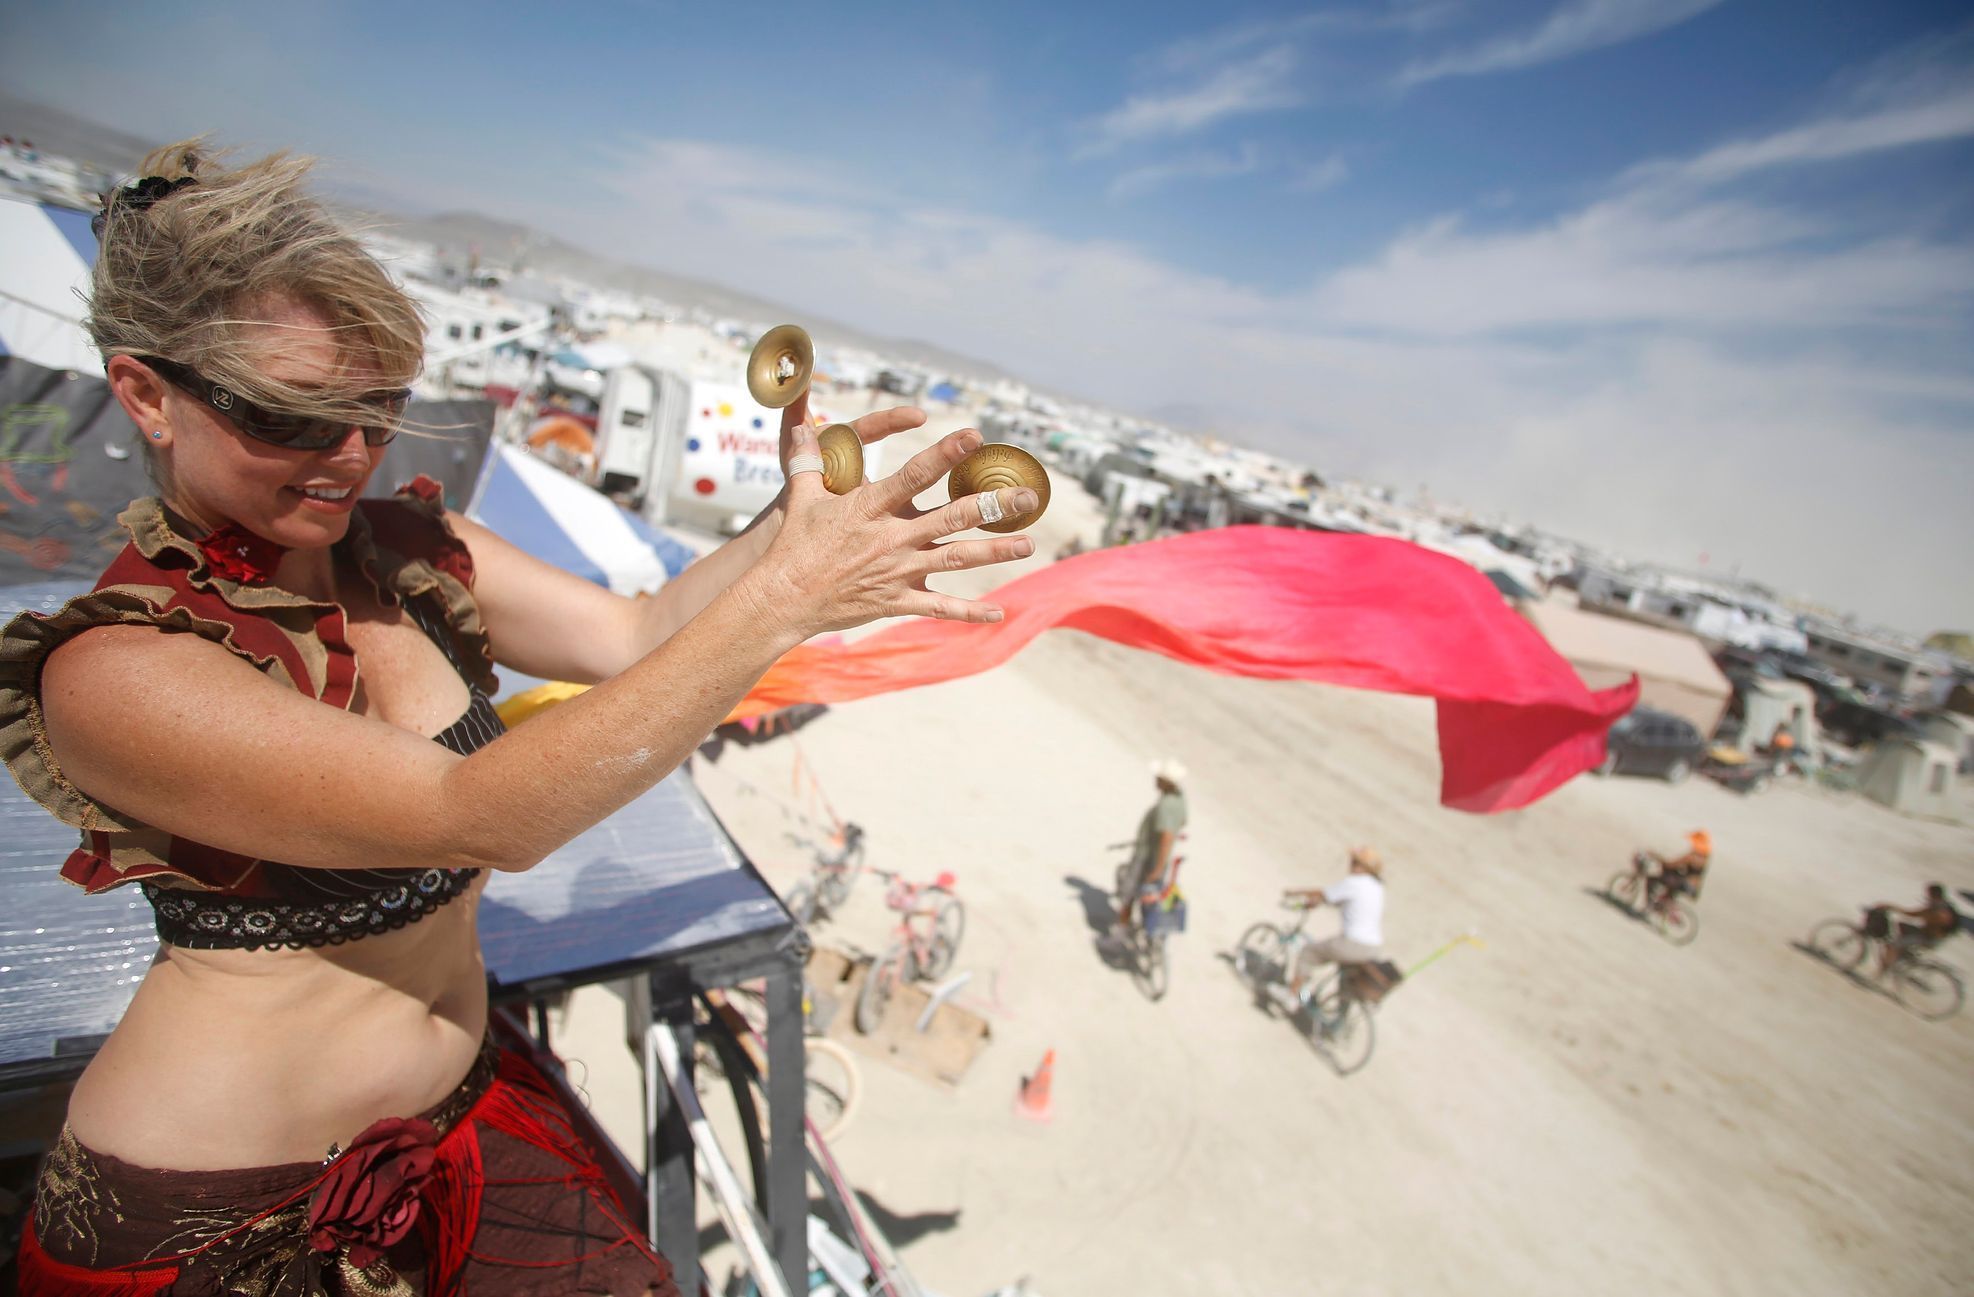 Paulina Carey dances during the Burning Man 2014 &quot;Caravansary&quot; arts and music festival in the Black Rock Desert of Nevada